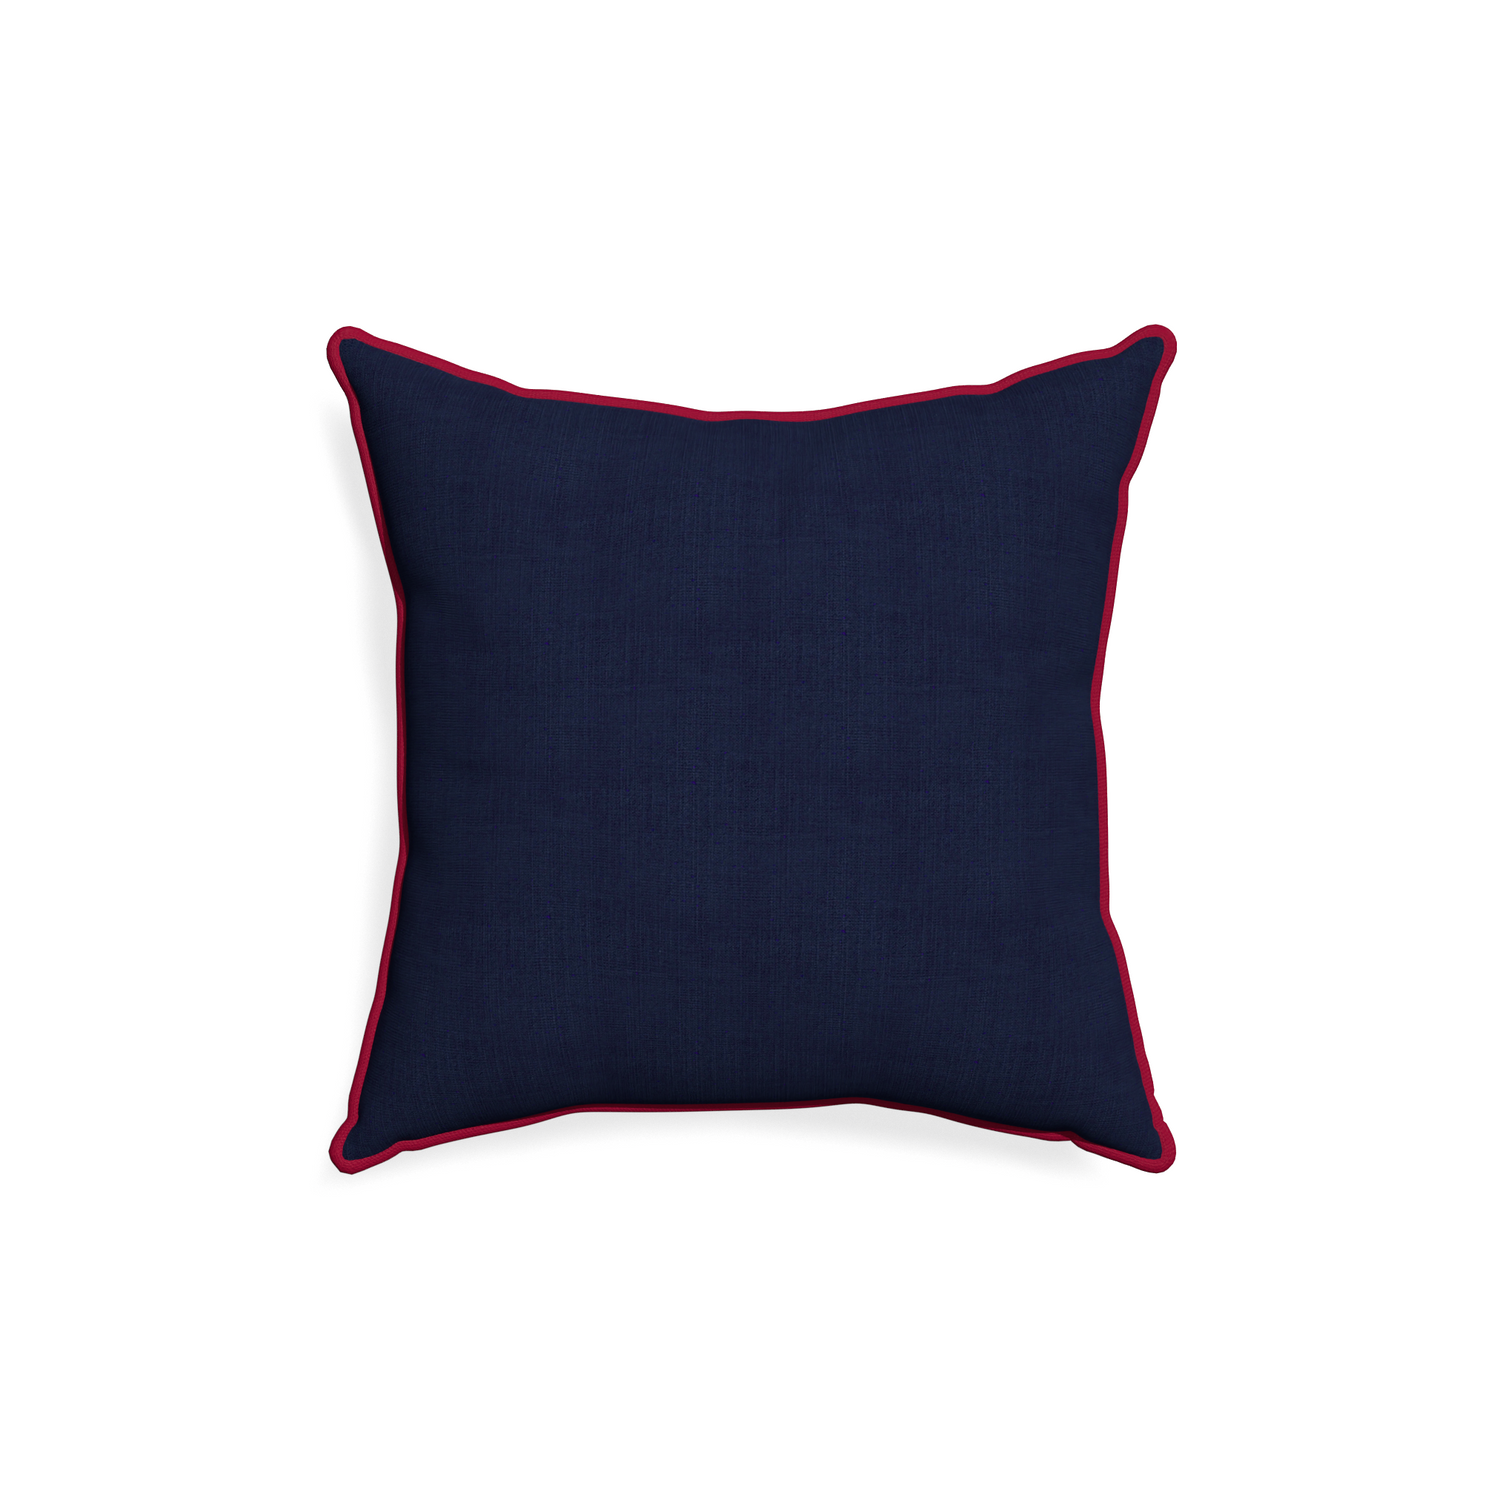 18-square midnight custom pillow with raspberry piping on white background